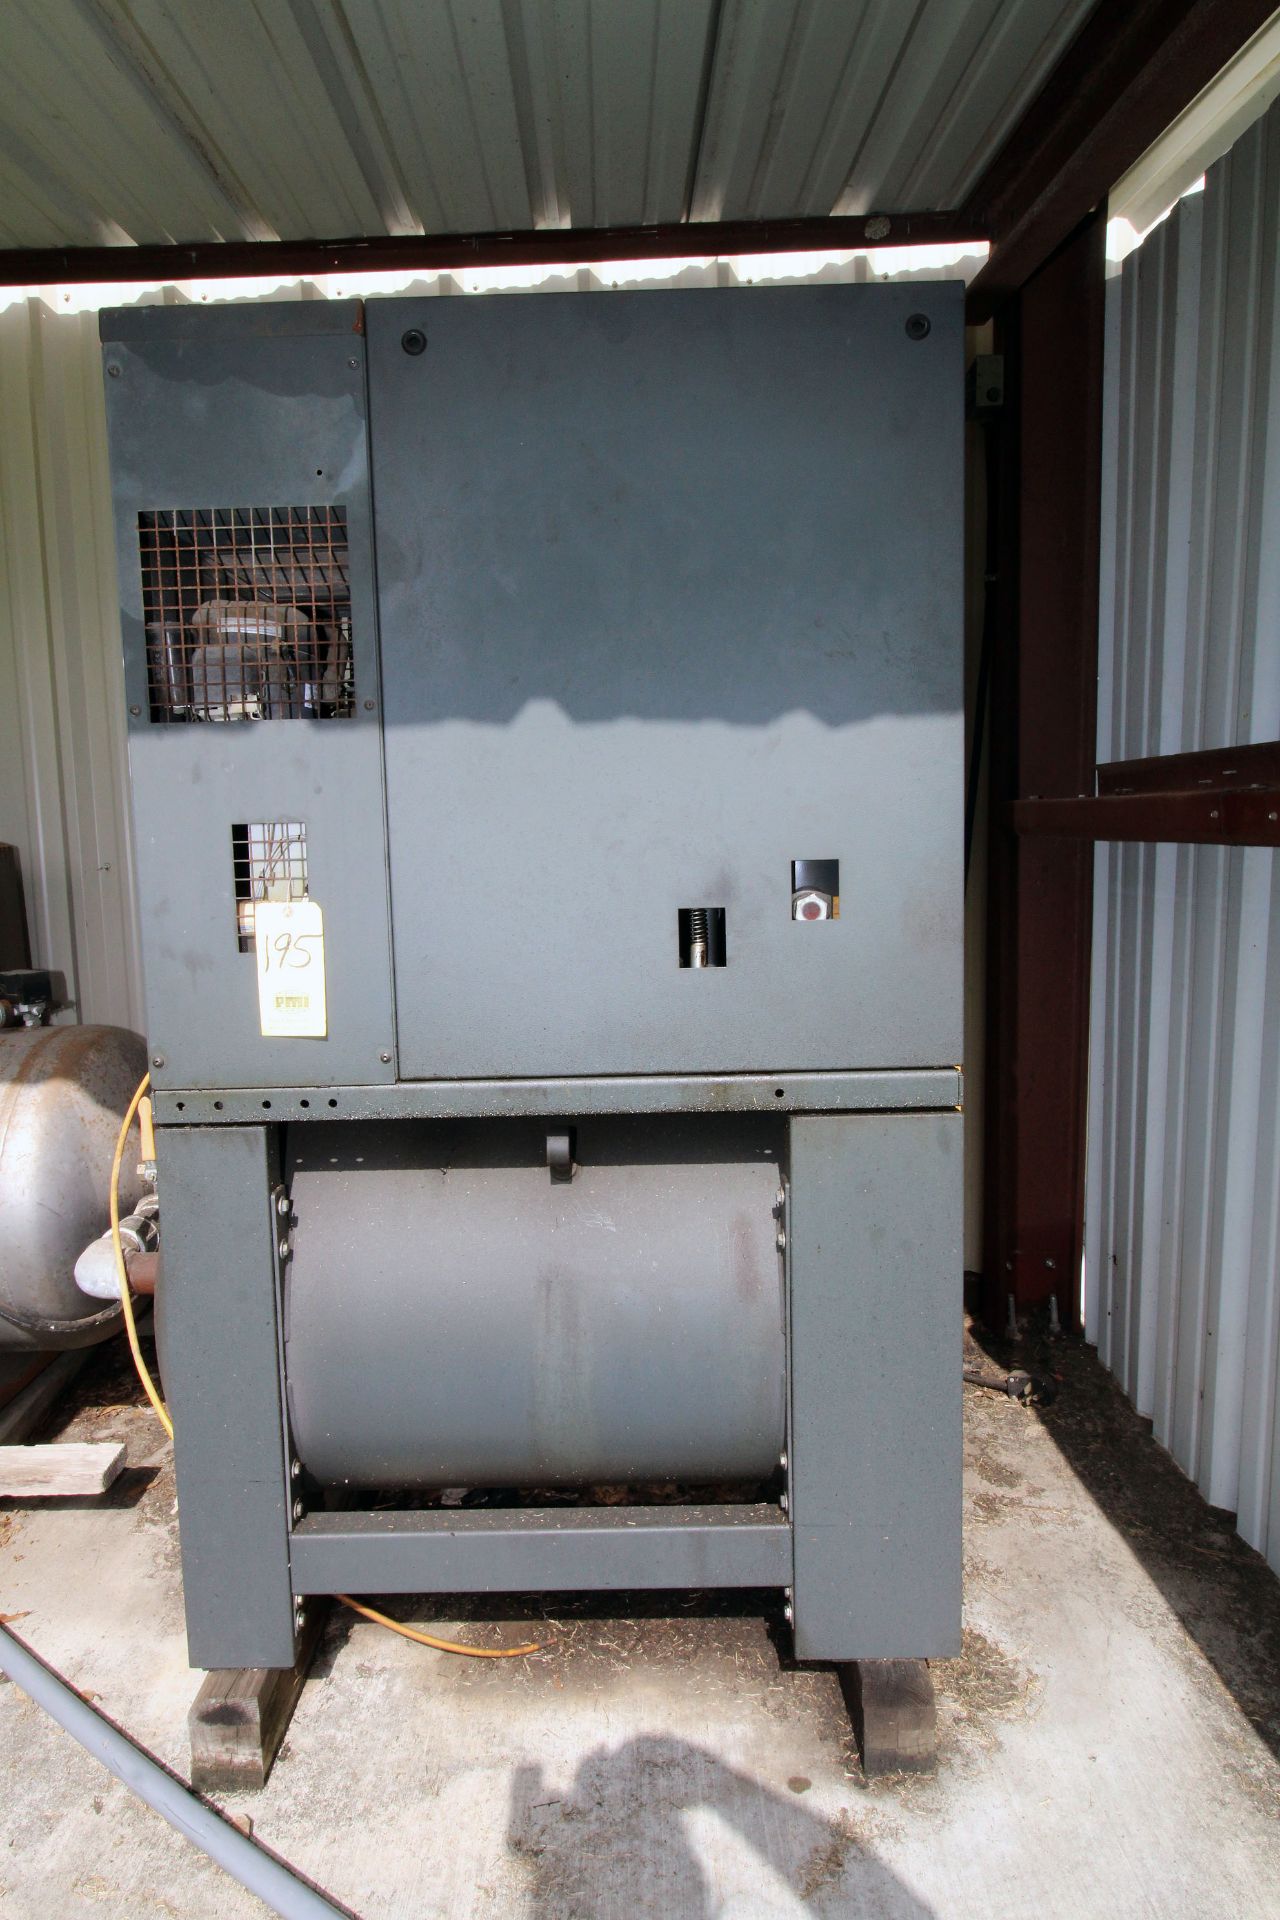 ROTARY SCREW AIR COMPRESSOR, KAESER SIGMA MDL. AIRCENTER SM10, new 2008, 42 CFM, 125 PSI, integrated